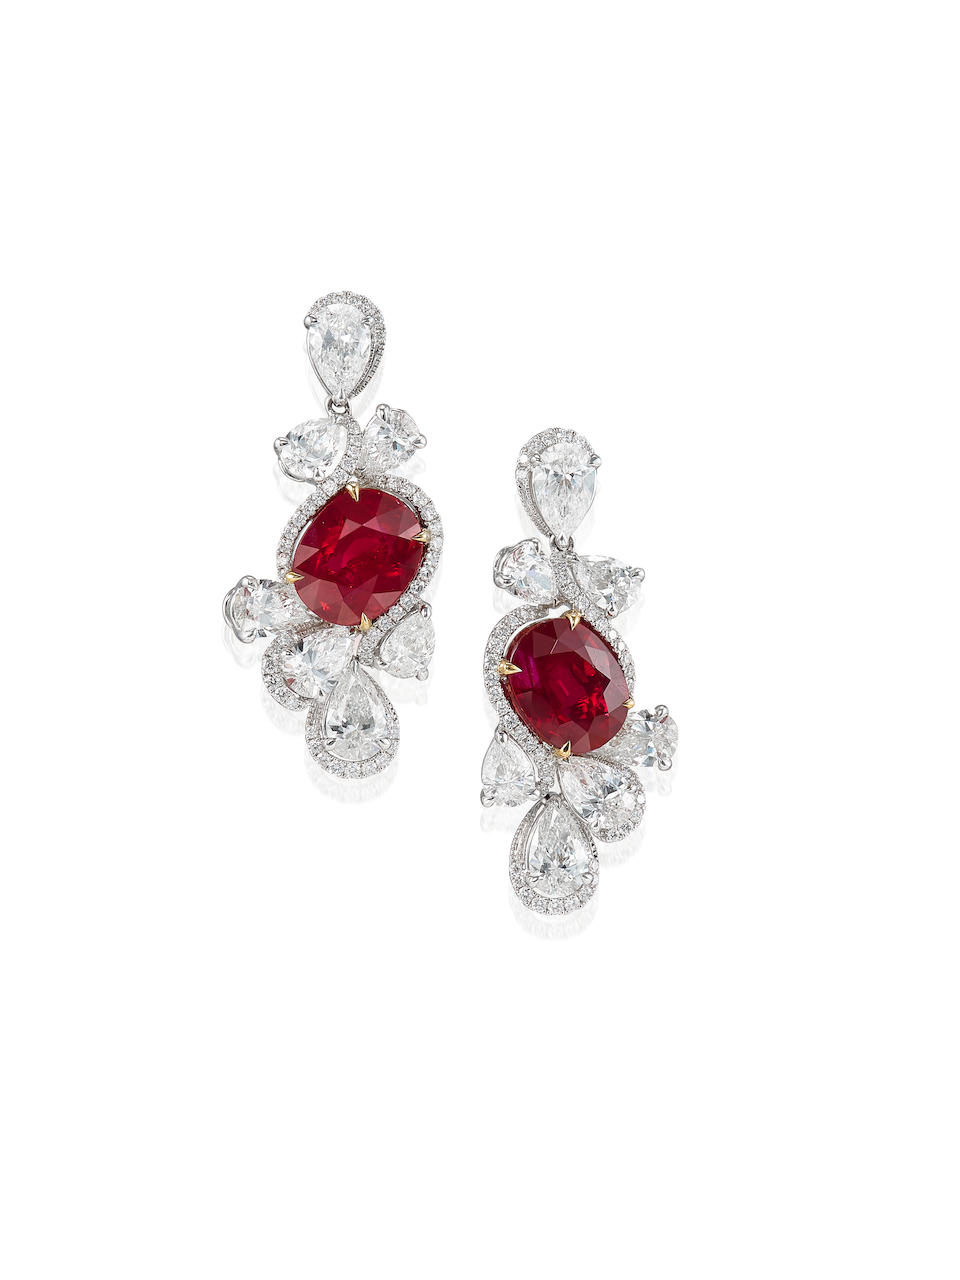 An Exquisite Pair of Ruby and Diamond Pendent Earrings